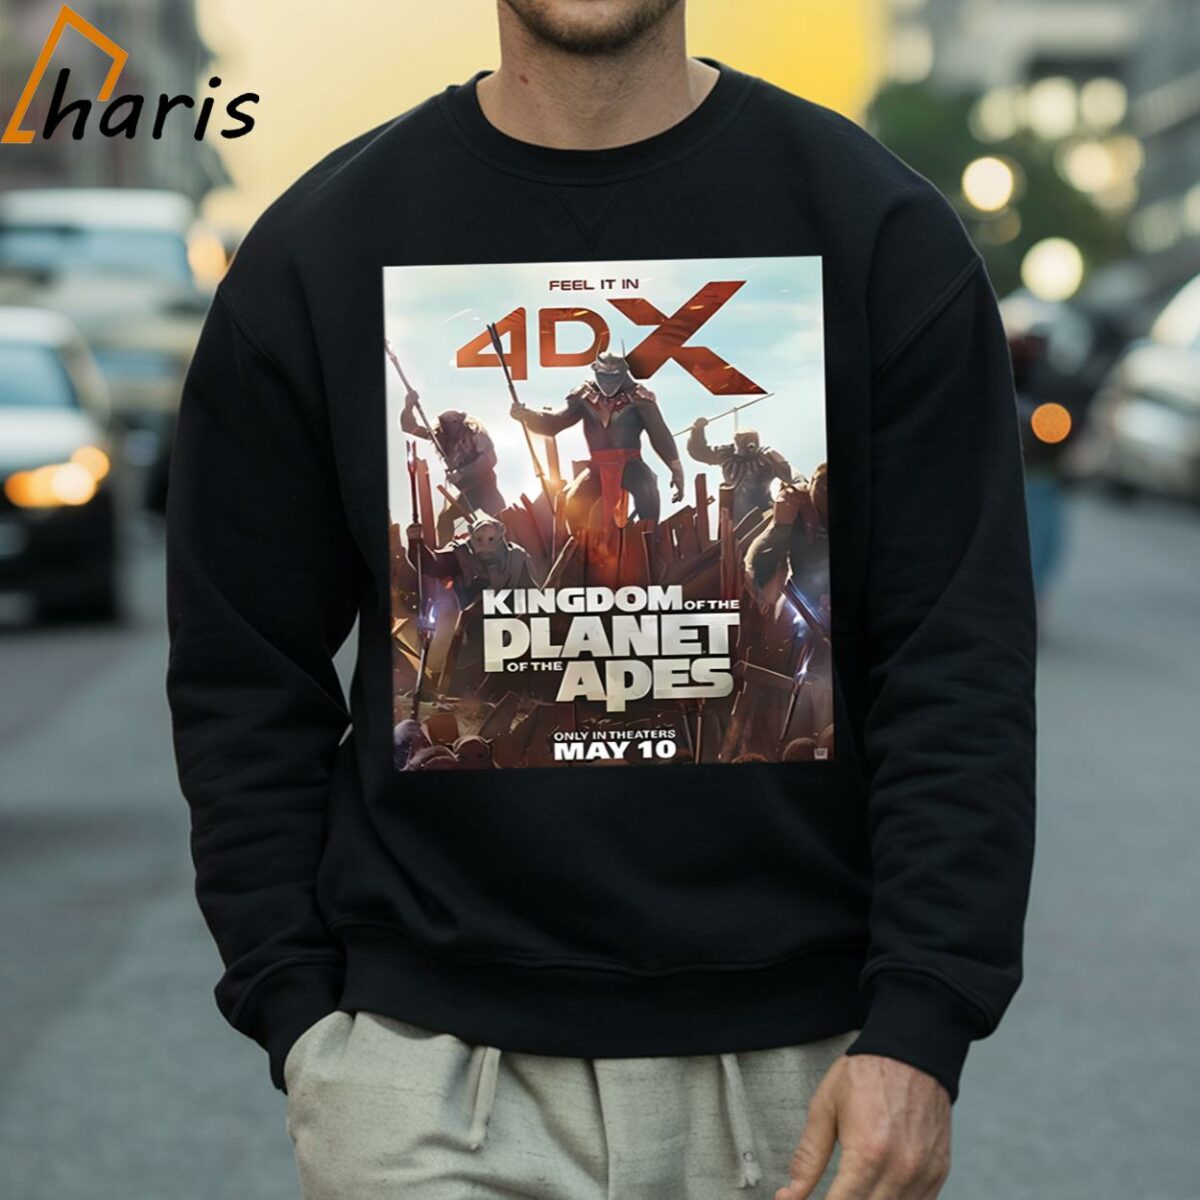 Kingdom Of The Planet Of The Apes 4DX Poster T shirt 4 Sweatshirt